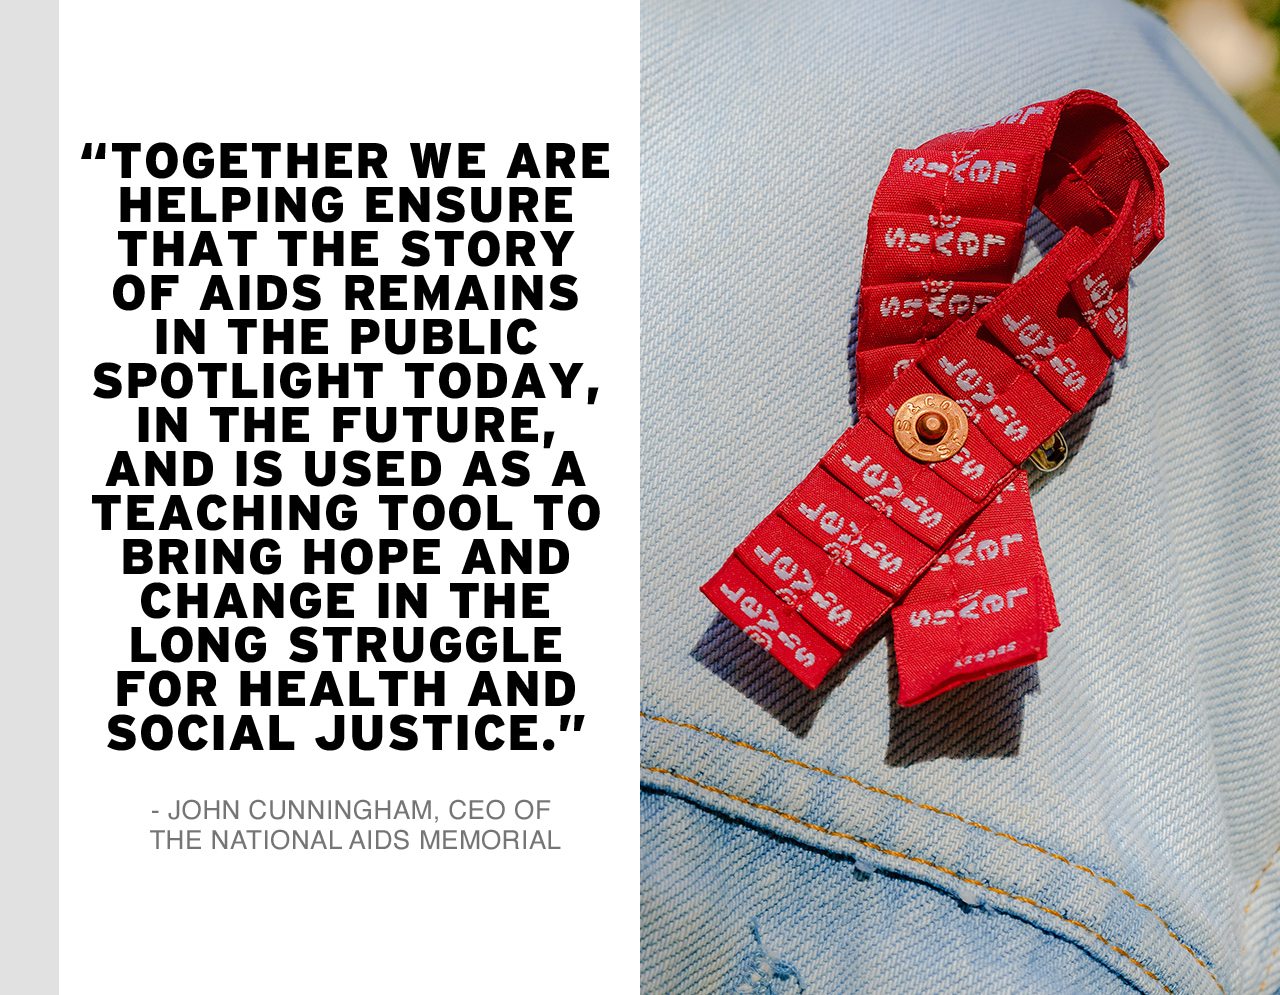 TOGETHER WE ARE HELPING ENSURE THAT THE STORY OF AIDS REMAINS IN THE PUBLIC SPOTLIGHT TODAY.